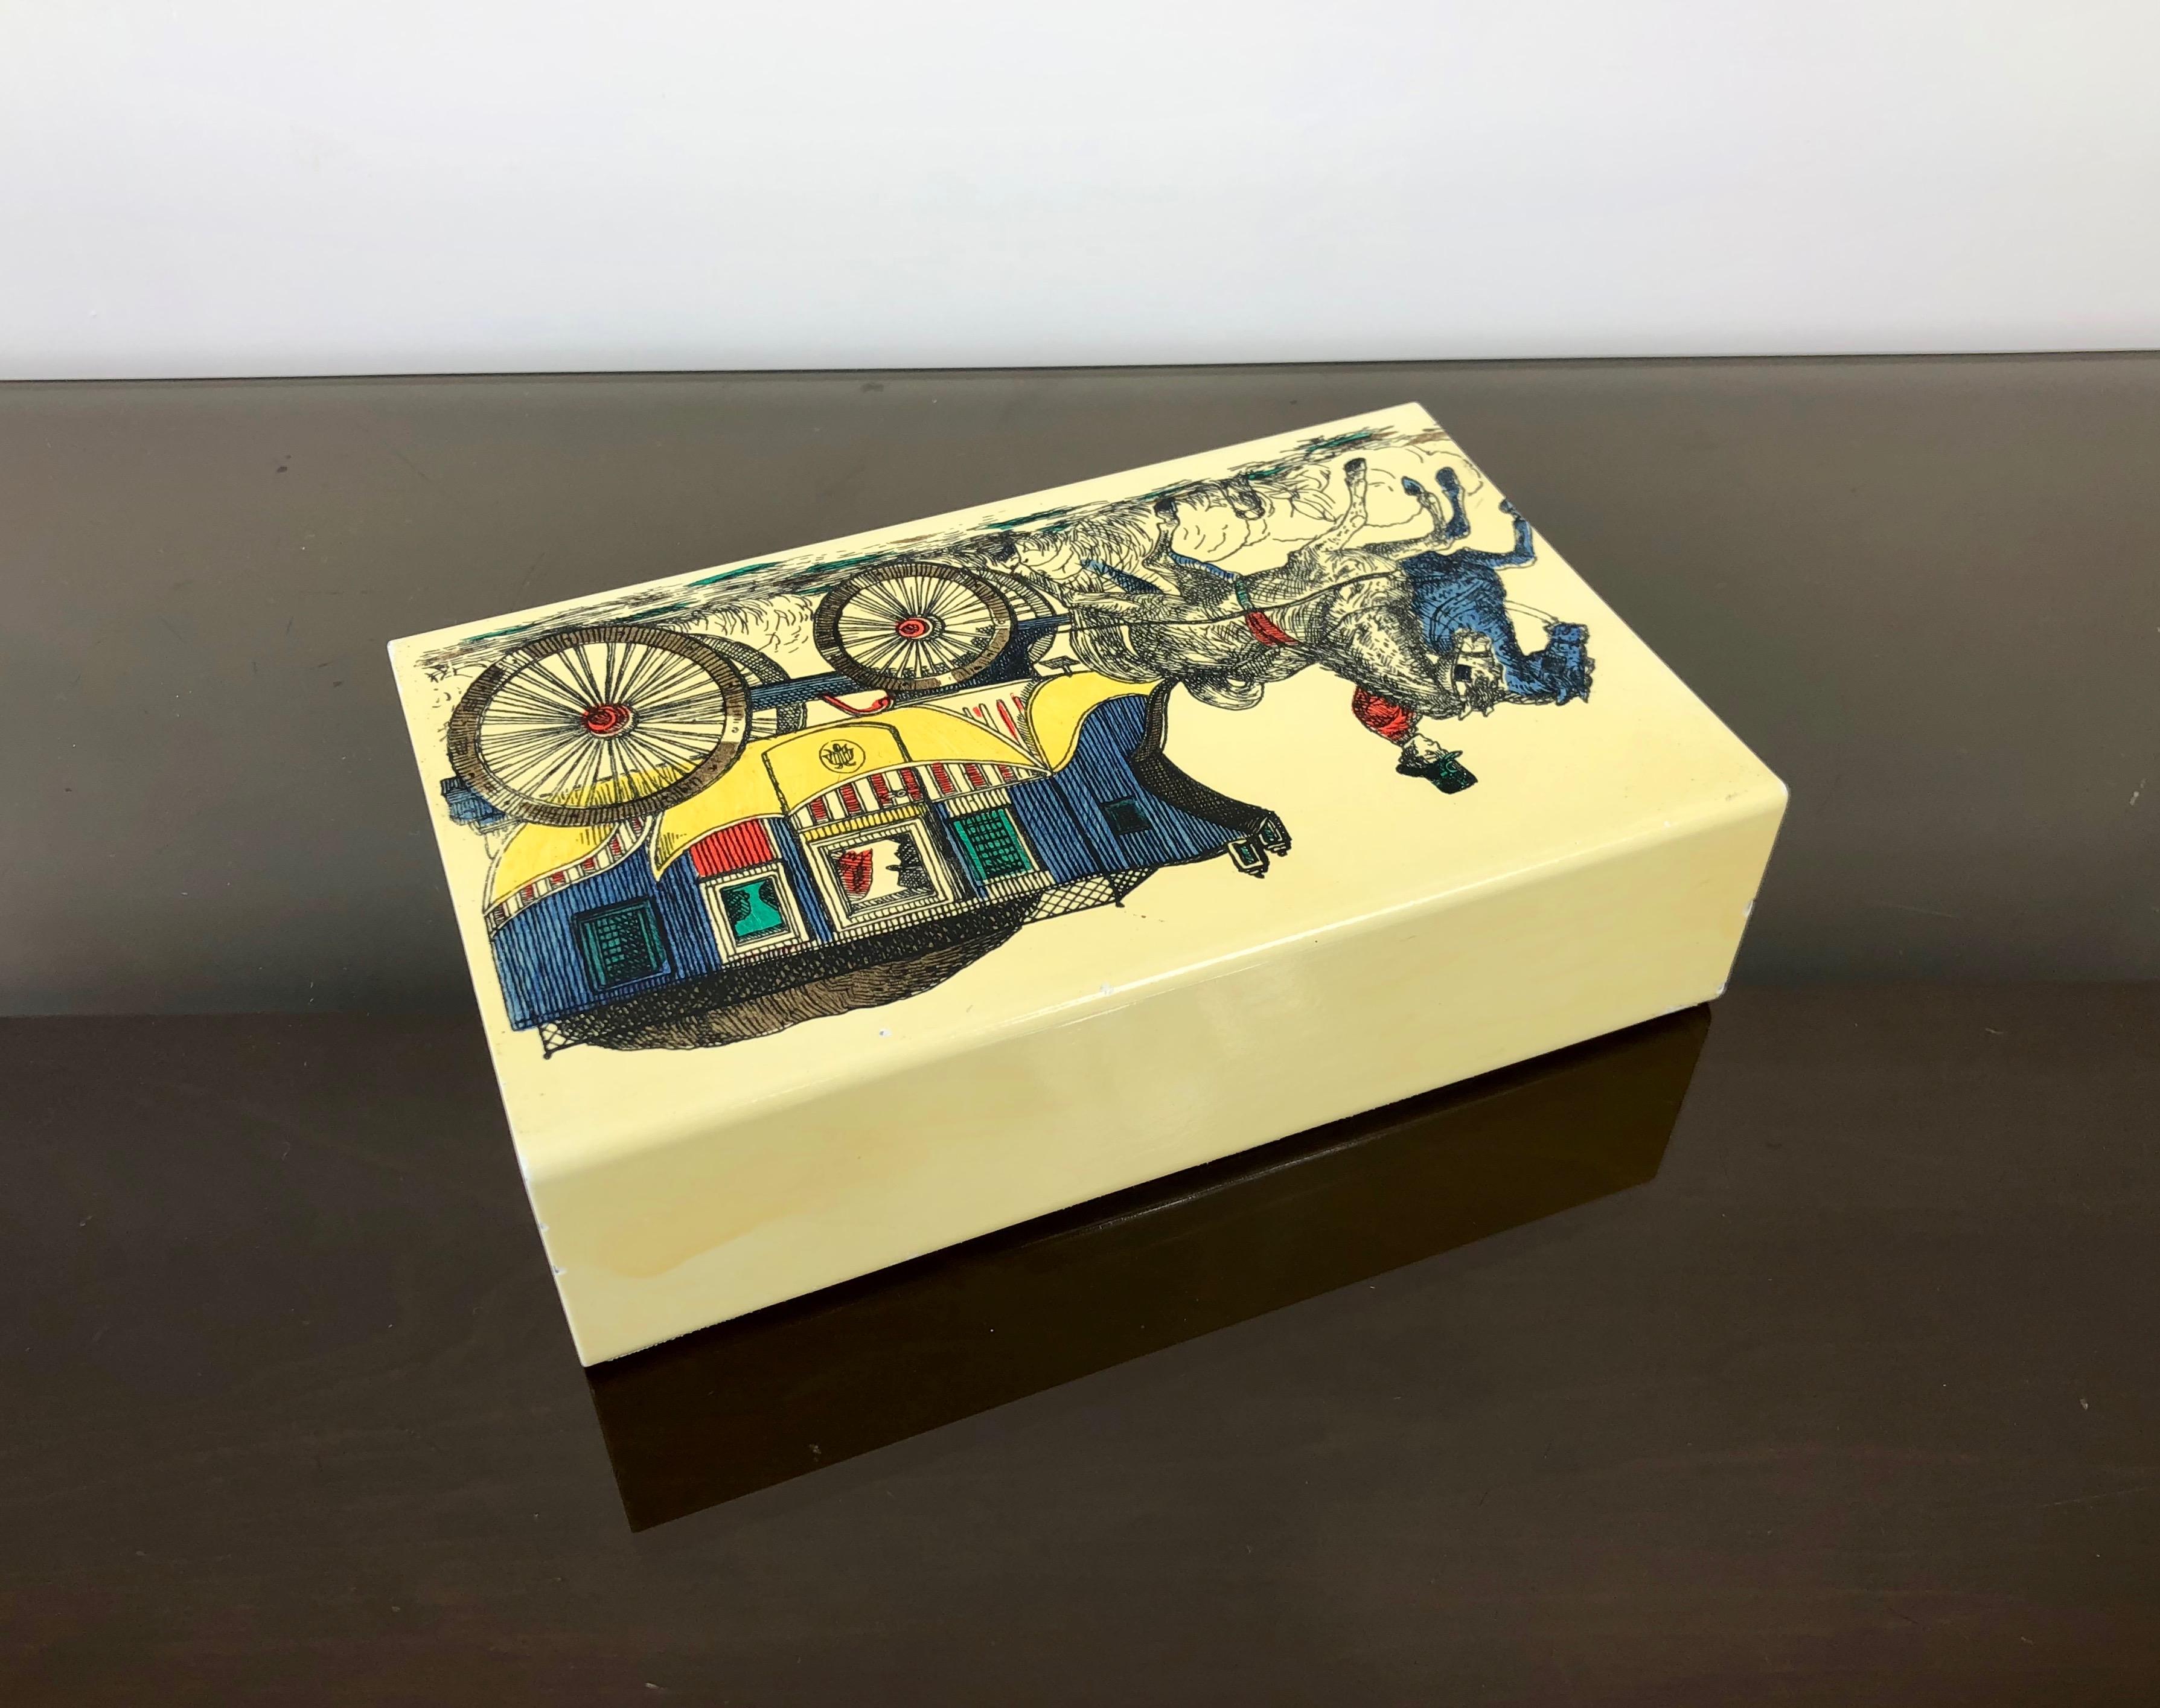 Fornasetti Mid-Century Modern Card Box, 1950s, Metal and Wood, Italy For Sale 1